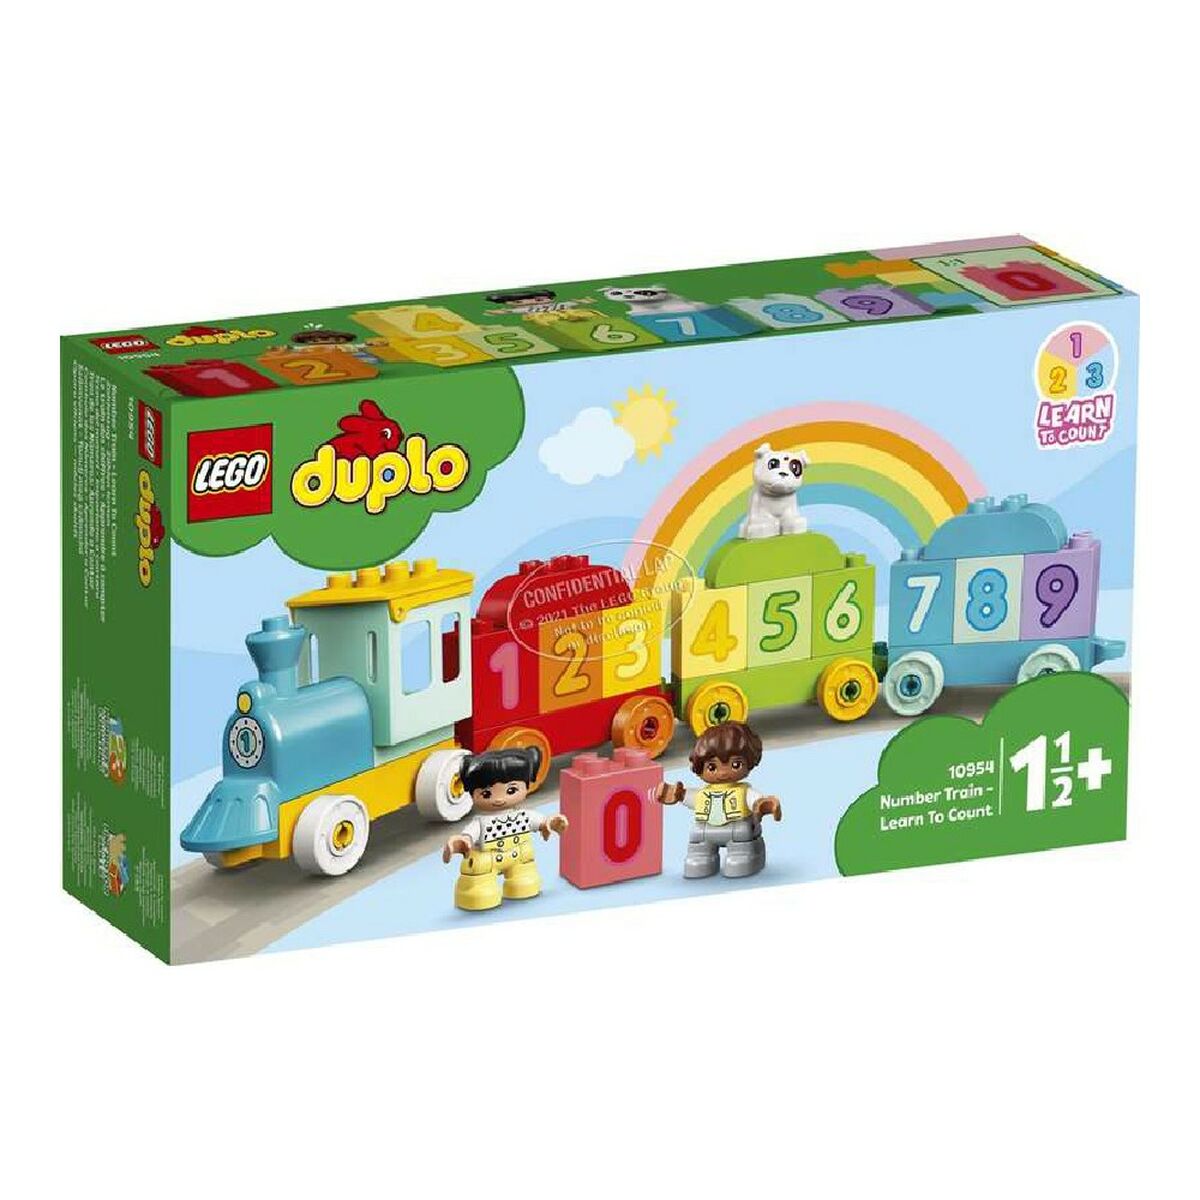 Playset Duplo Number Train LEGO (23 PC)